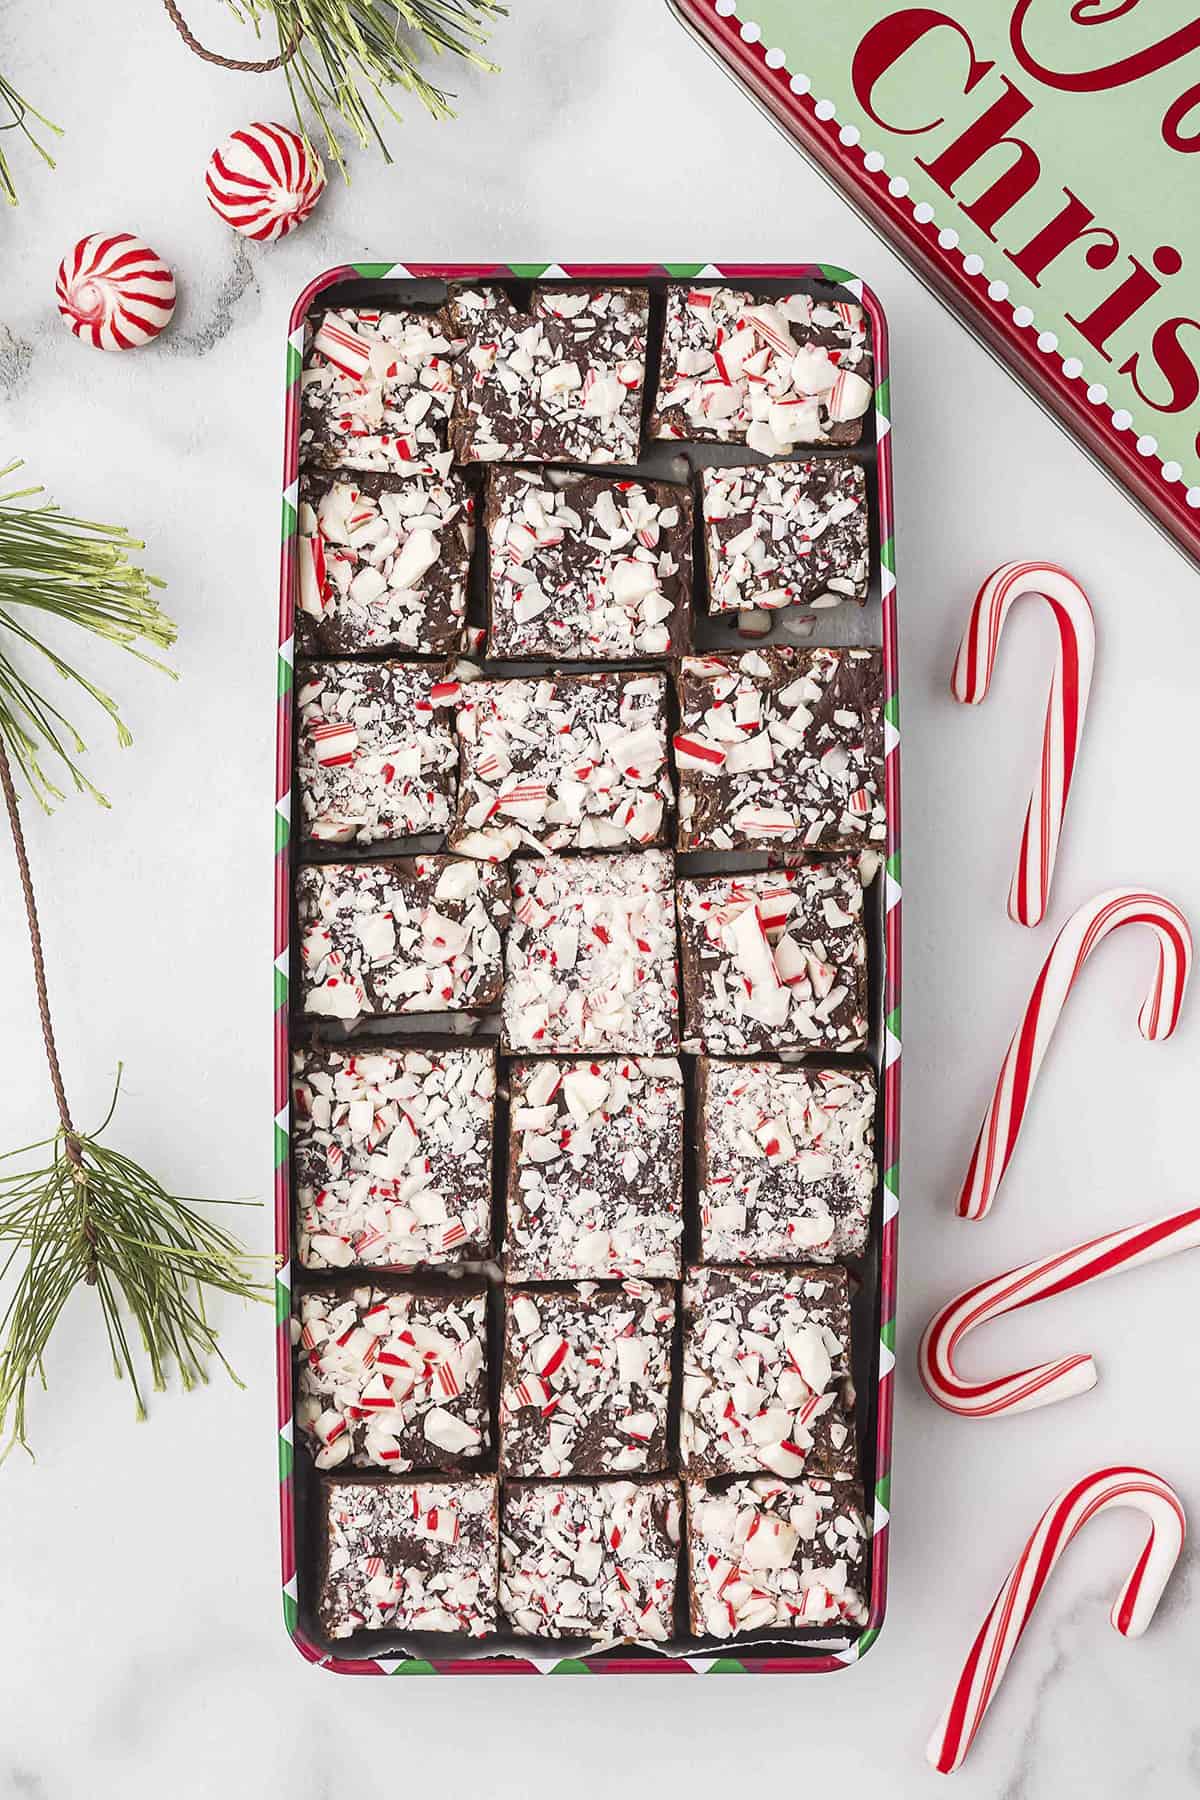 Peppermint fudge in Christmas tin surrounded by candy canes.